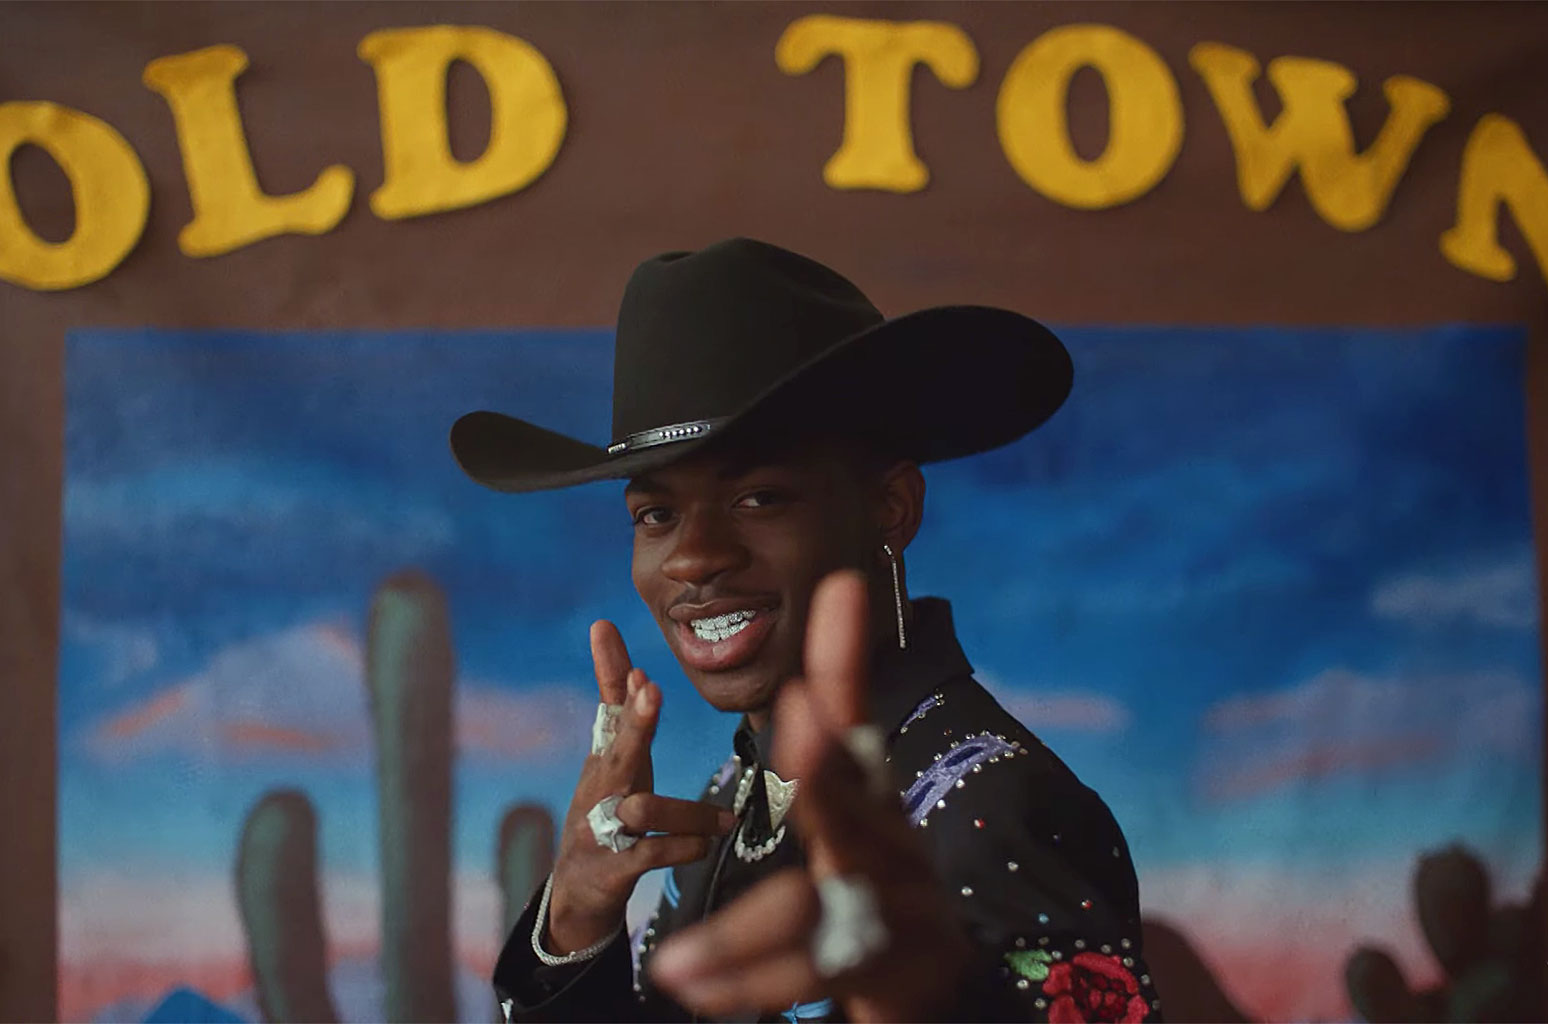 07-Lil-Nas-X-billy-ray-cyrus-Old-Town-Road-2019-billboard-1548[2]